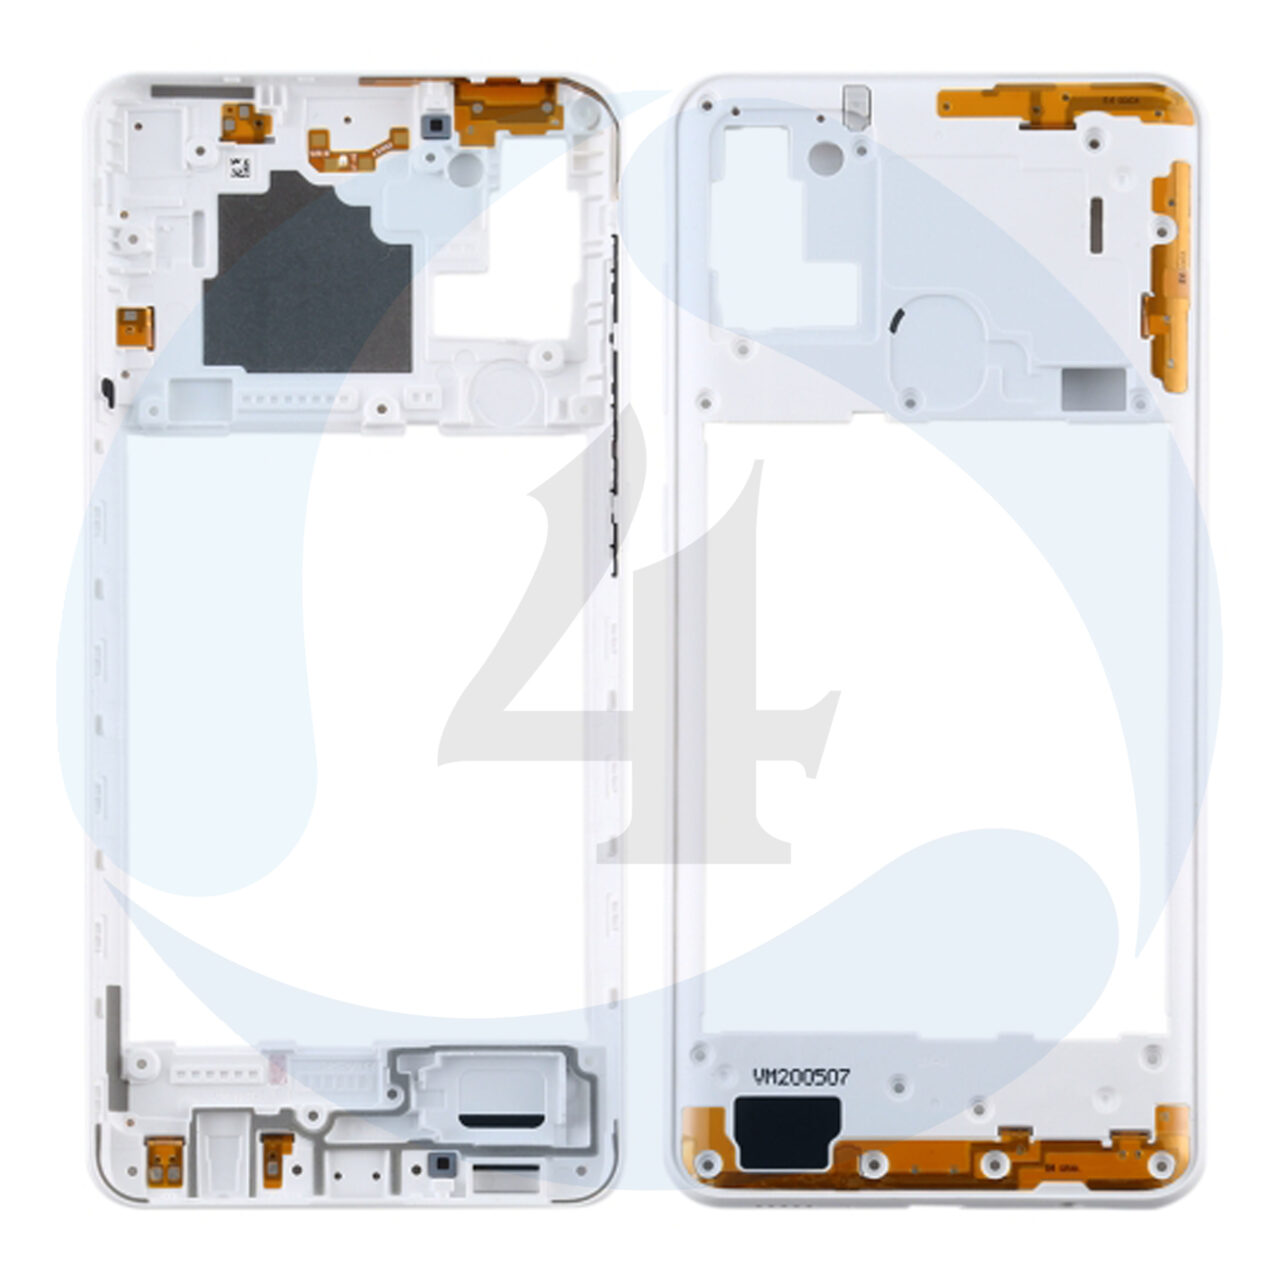 Samsung Galaxy A21s SM A217 F DS Middle Frame Bezel Plate Cover white